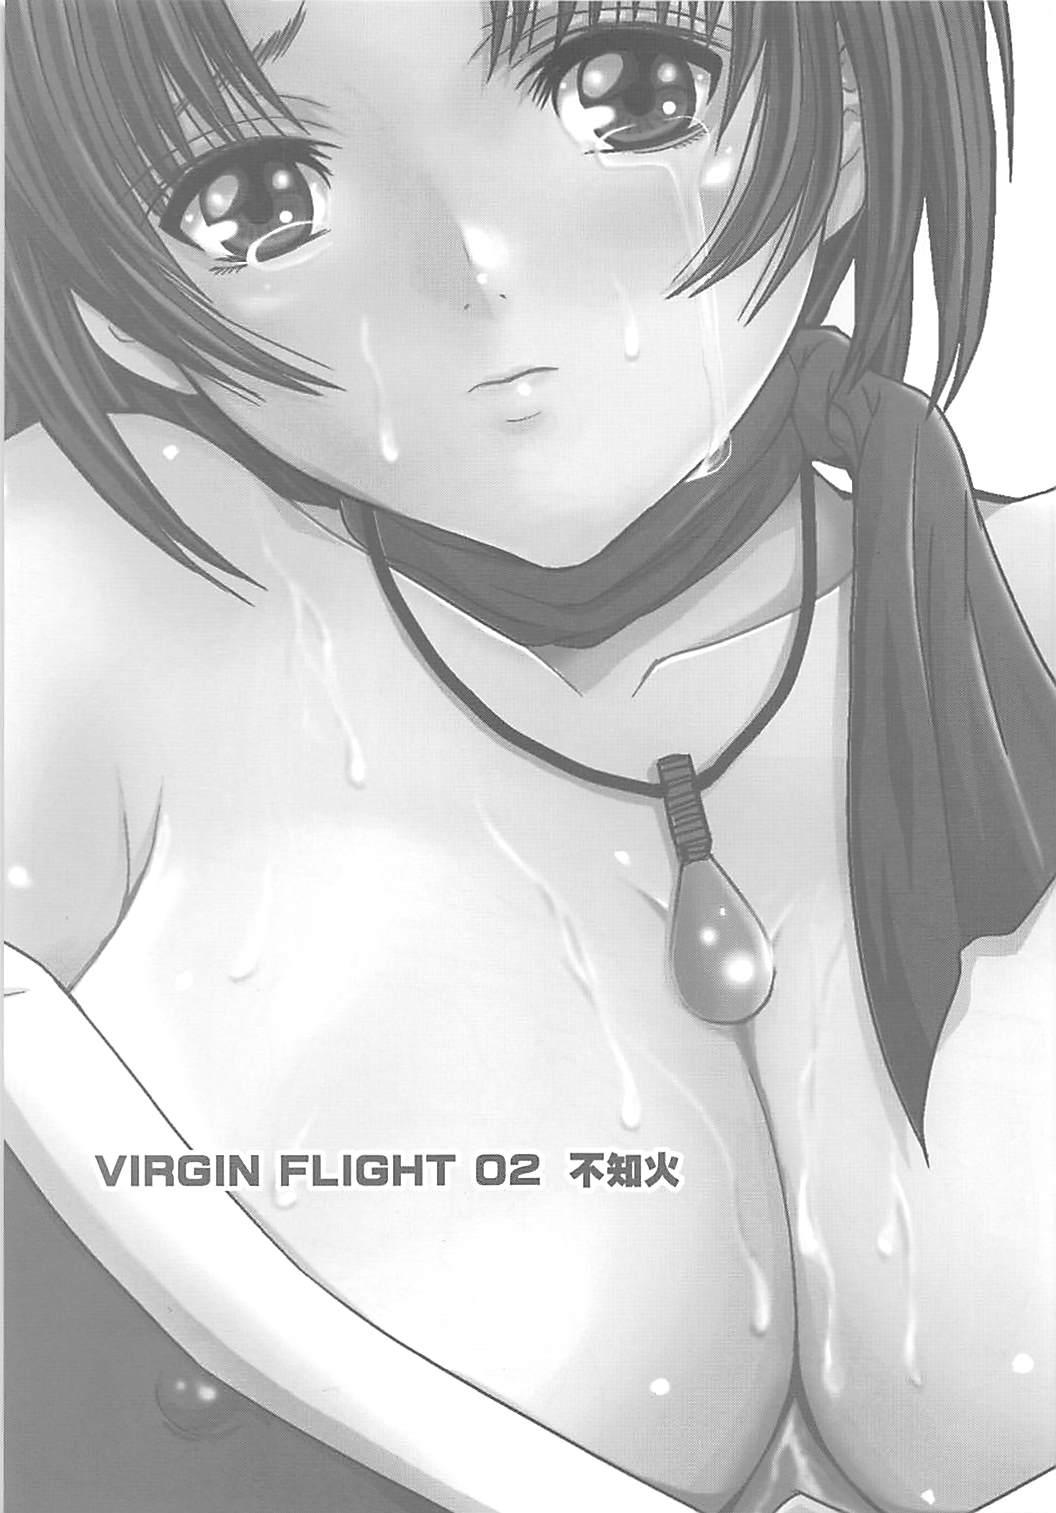 Gayhardcore VIRGIN FLIGHT 02 Shiranui - King of fighters Toys - Page 2